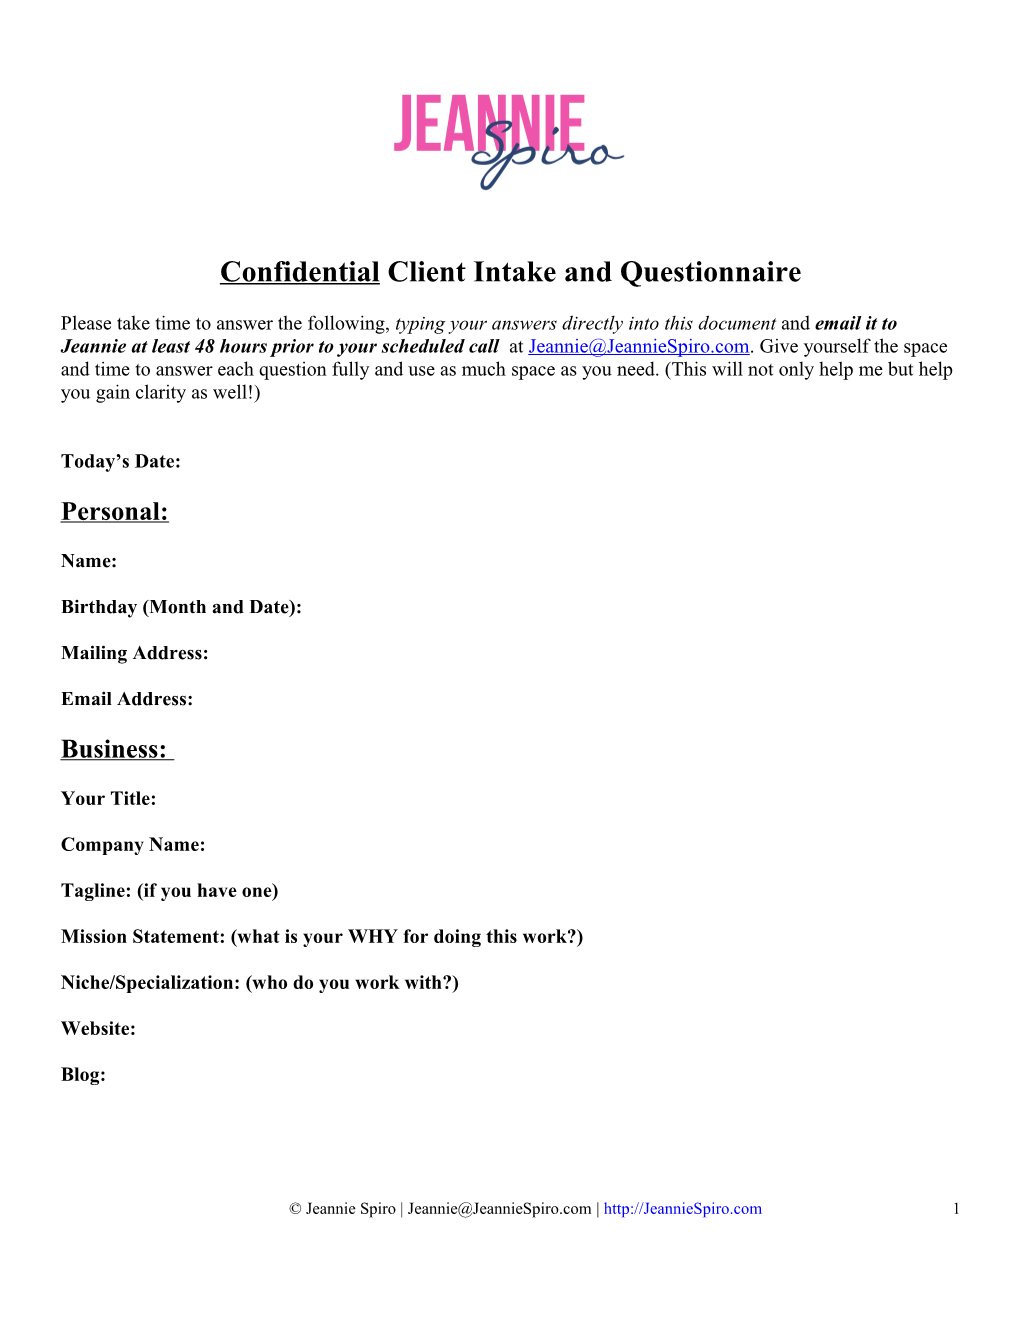 Confidential Client Intake and Questionnaire